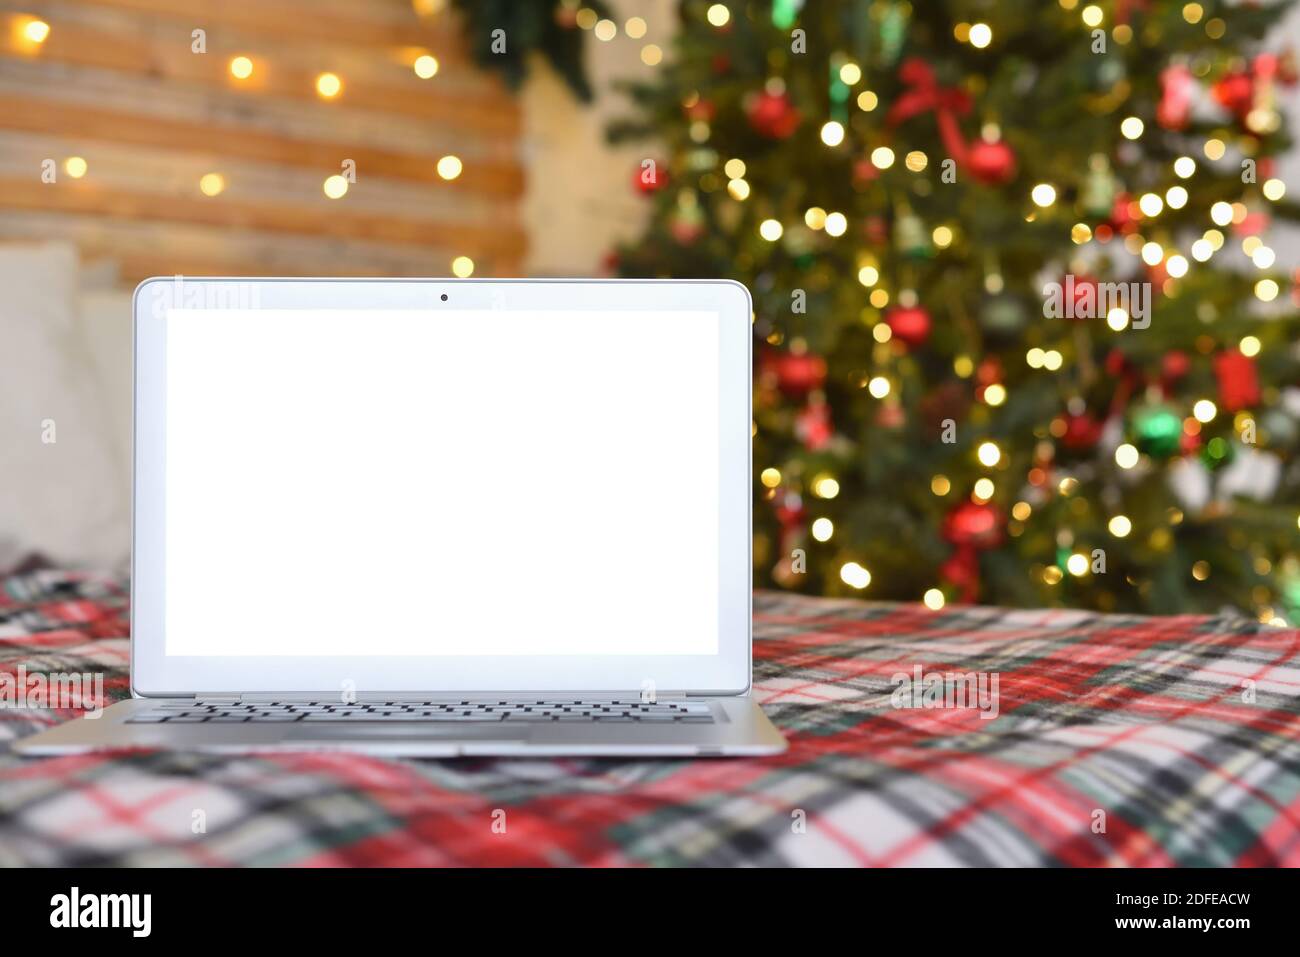 Laptop with blank screen on bed with plaid and Christmas lights Stock Photo